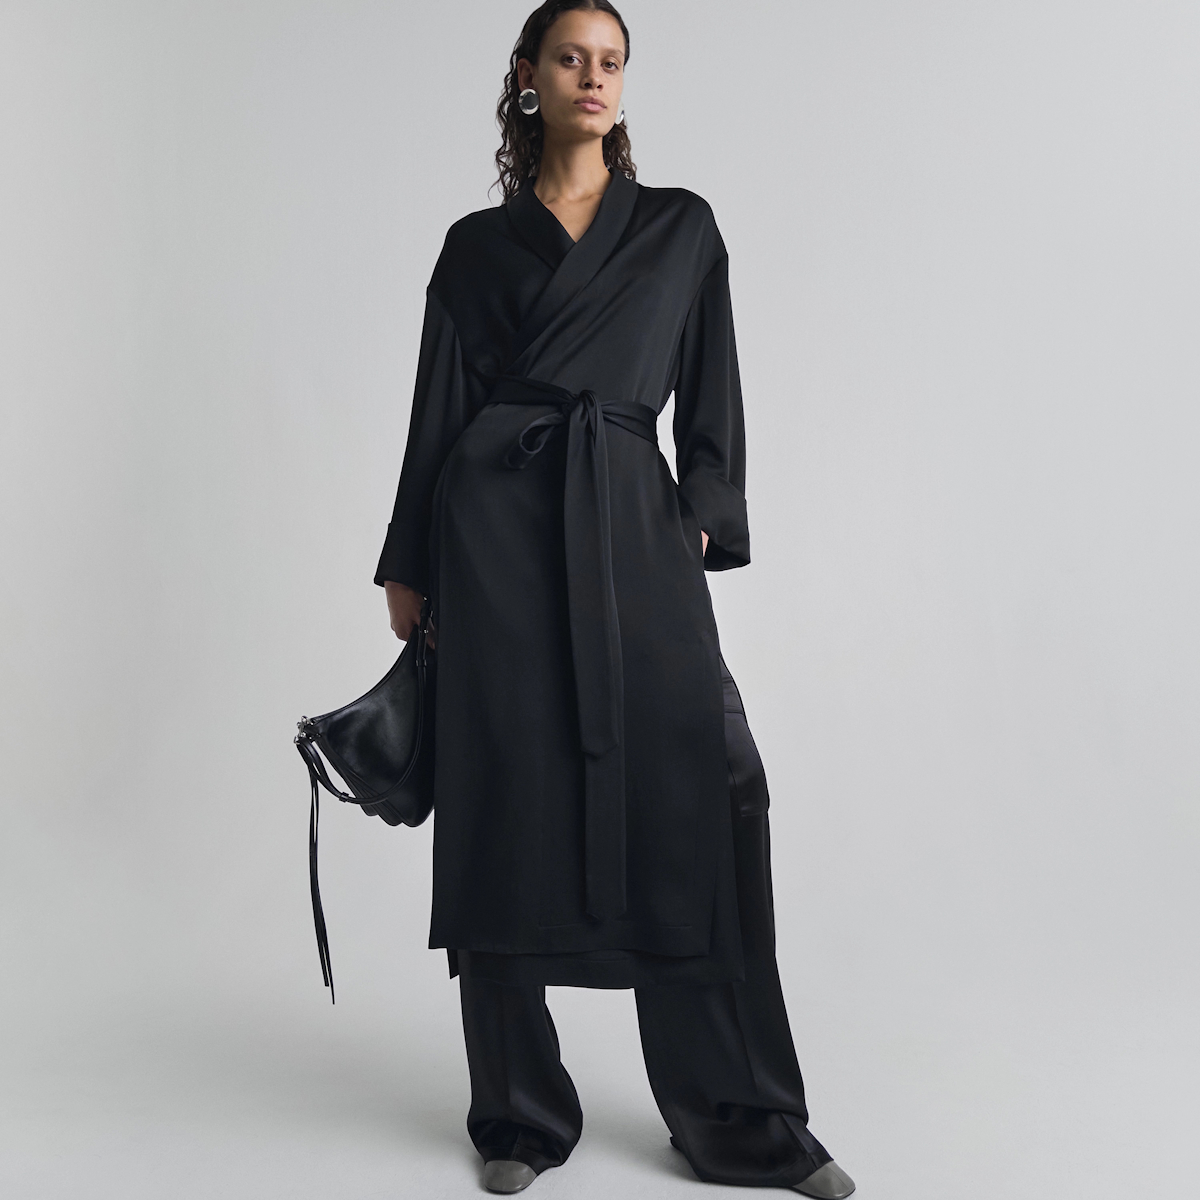 7 Must-Have Pieces from Drop Two of Phoebe Philo's Eponymous Label